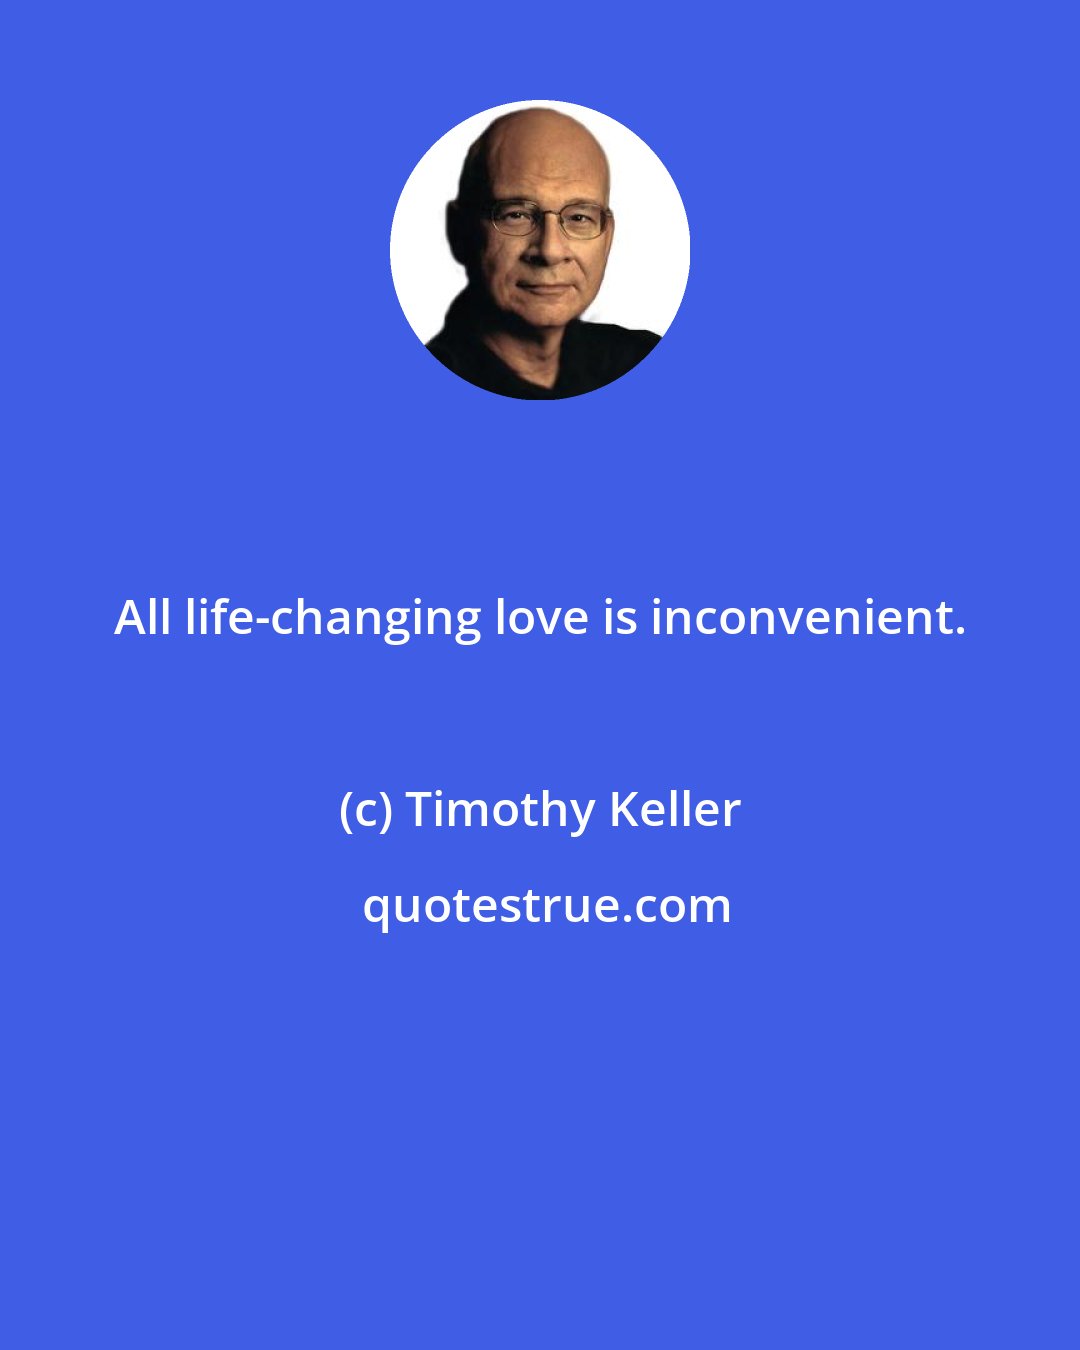 Timothy Keller: All life-changing love is inconvenient.